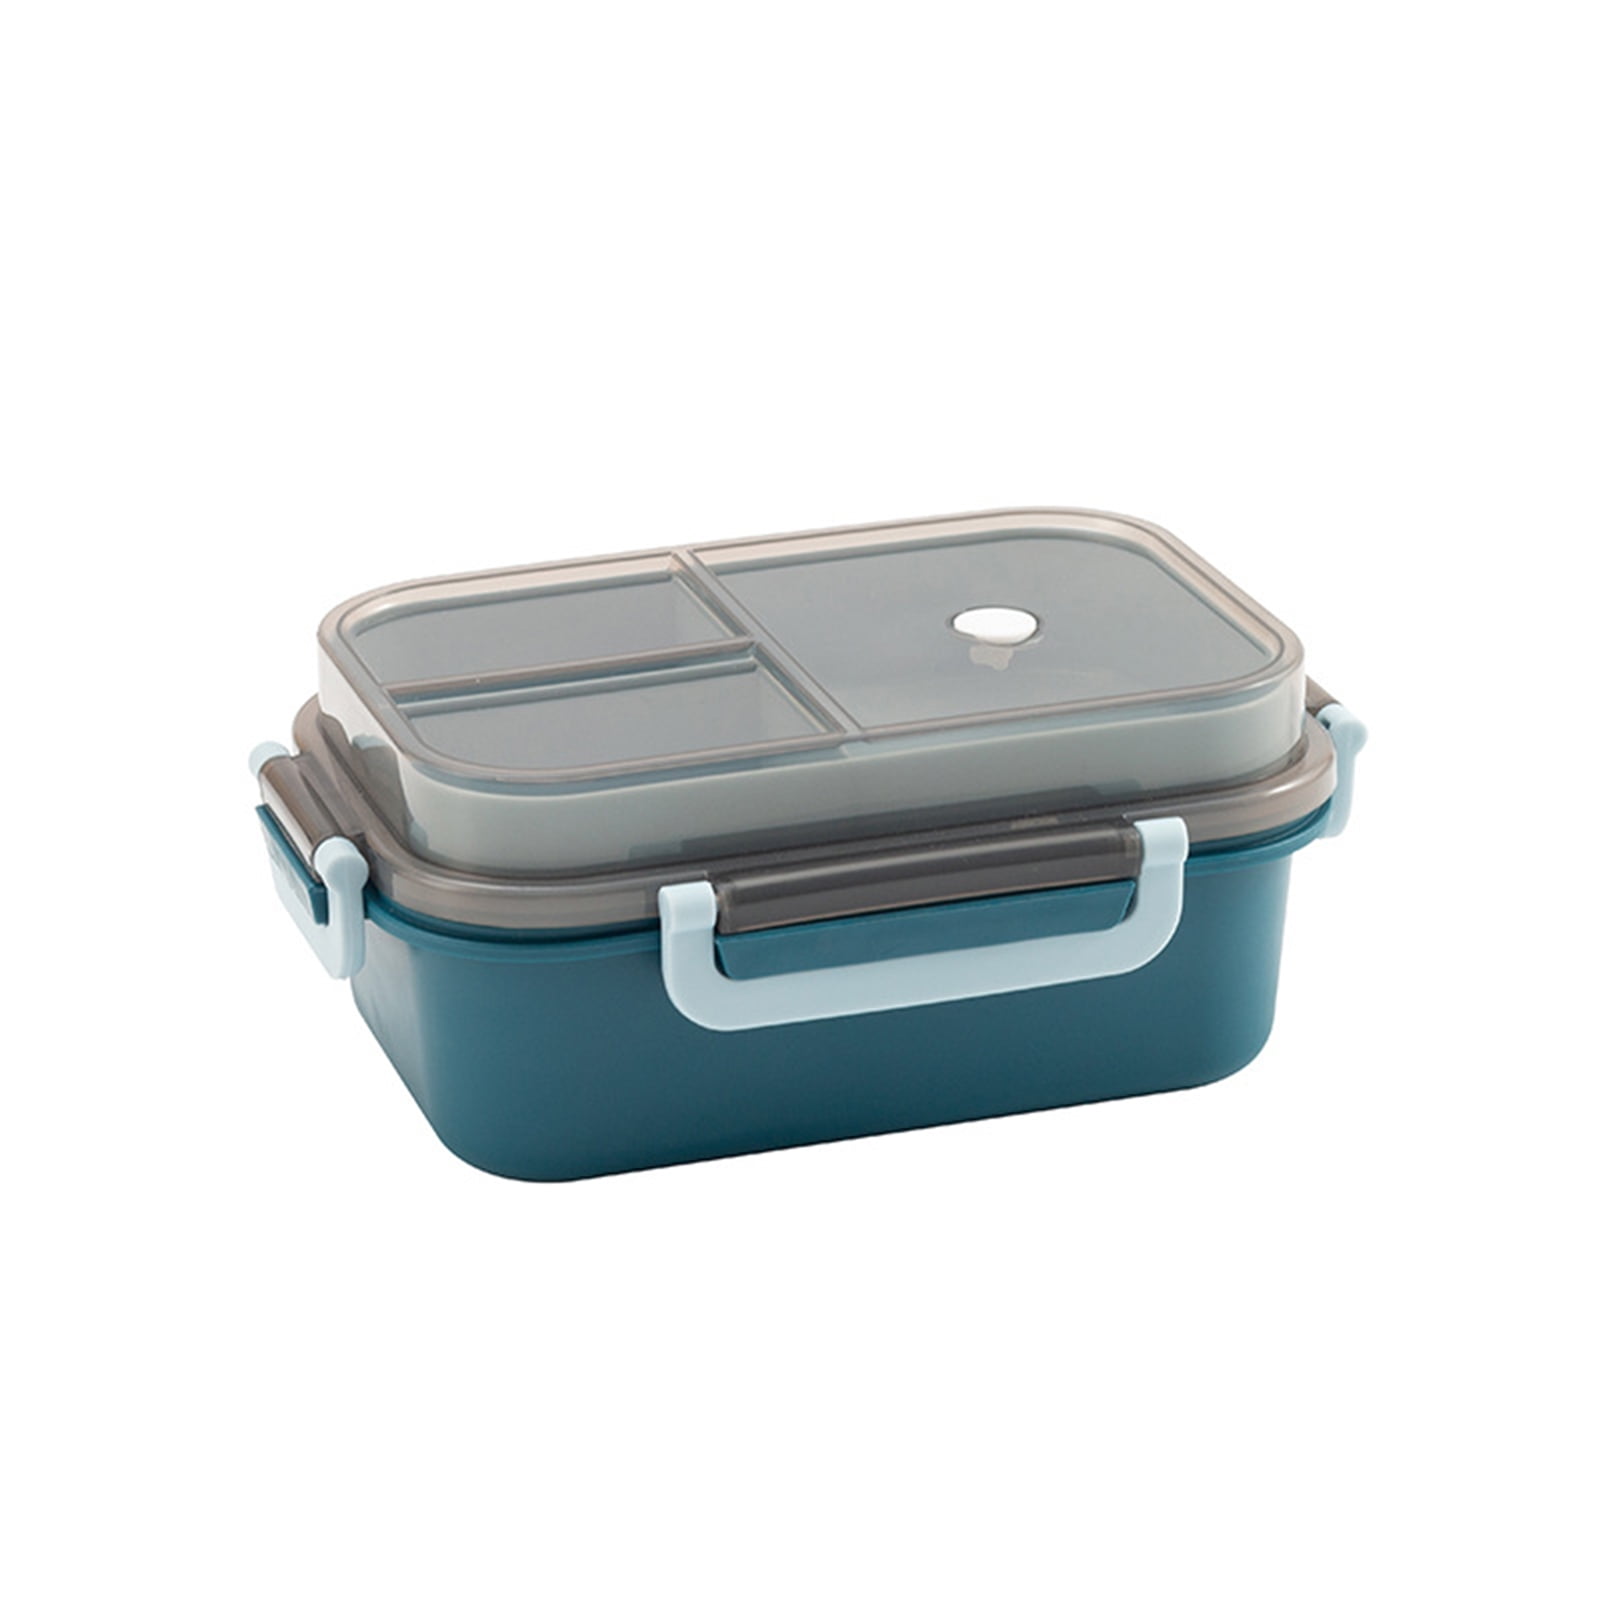 YUNx Portable Two-Compartment Lunch Box with Tableware - 850ml